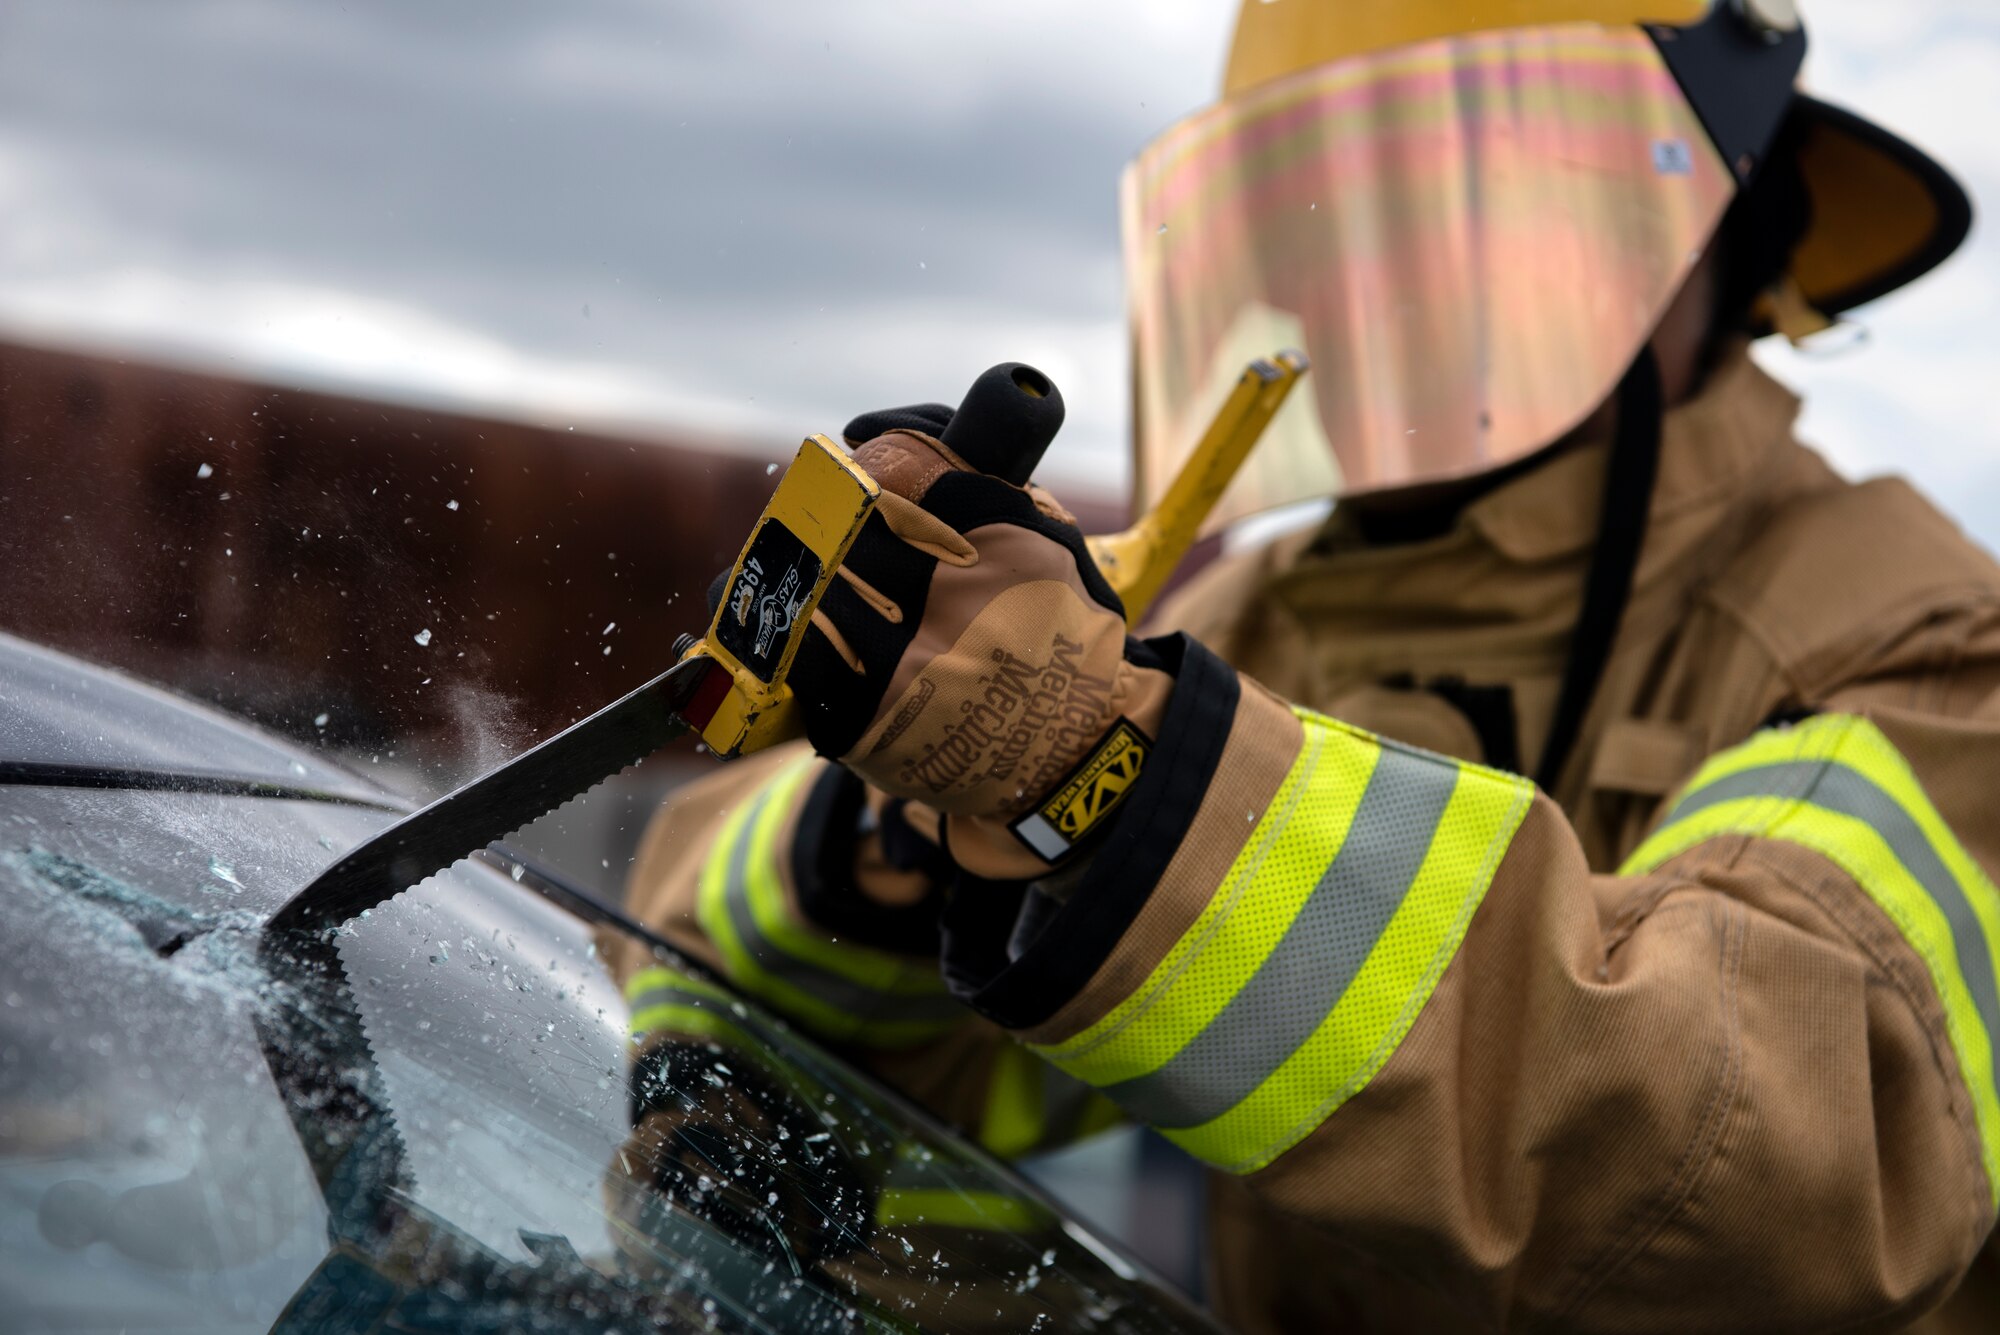 Omar Moylan, a senior at Spangdahlem High School, cuts through a windshield at Spangdahlem Air Base, Germany, March 26, 2019. Moylan, who plans on becoming a firefighter, participated in vehicle extrication training with the 52nd Civil Engineer Squadron Fire Department to gain real-life experience in his desired career field. (U.S. Air Force photo by Airman 1st Class Valerie Seelye)